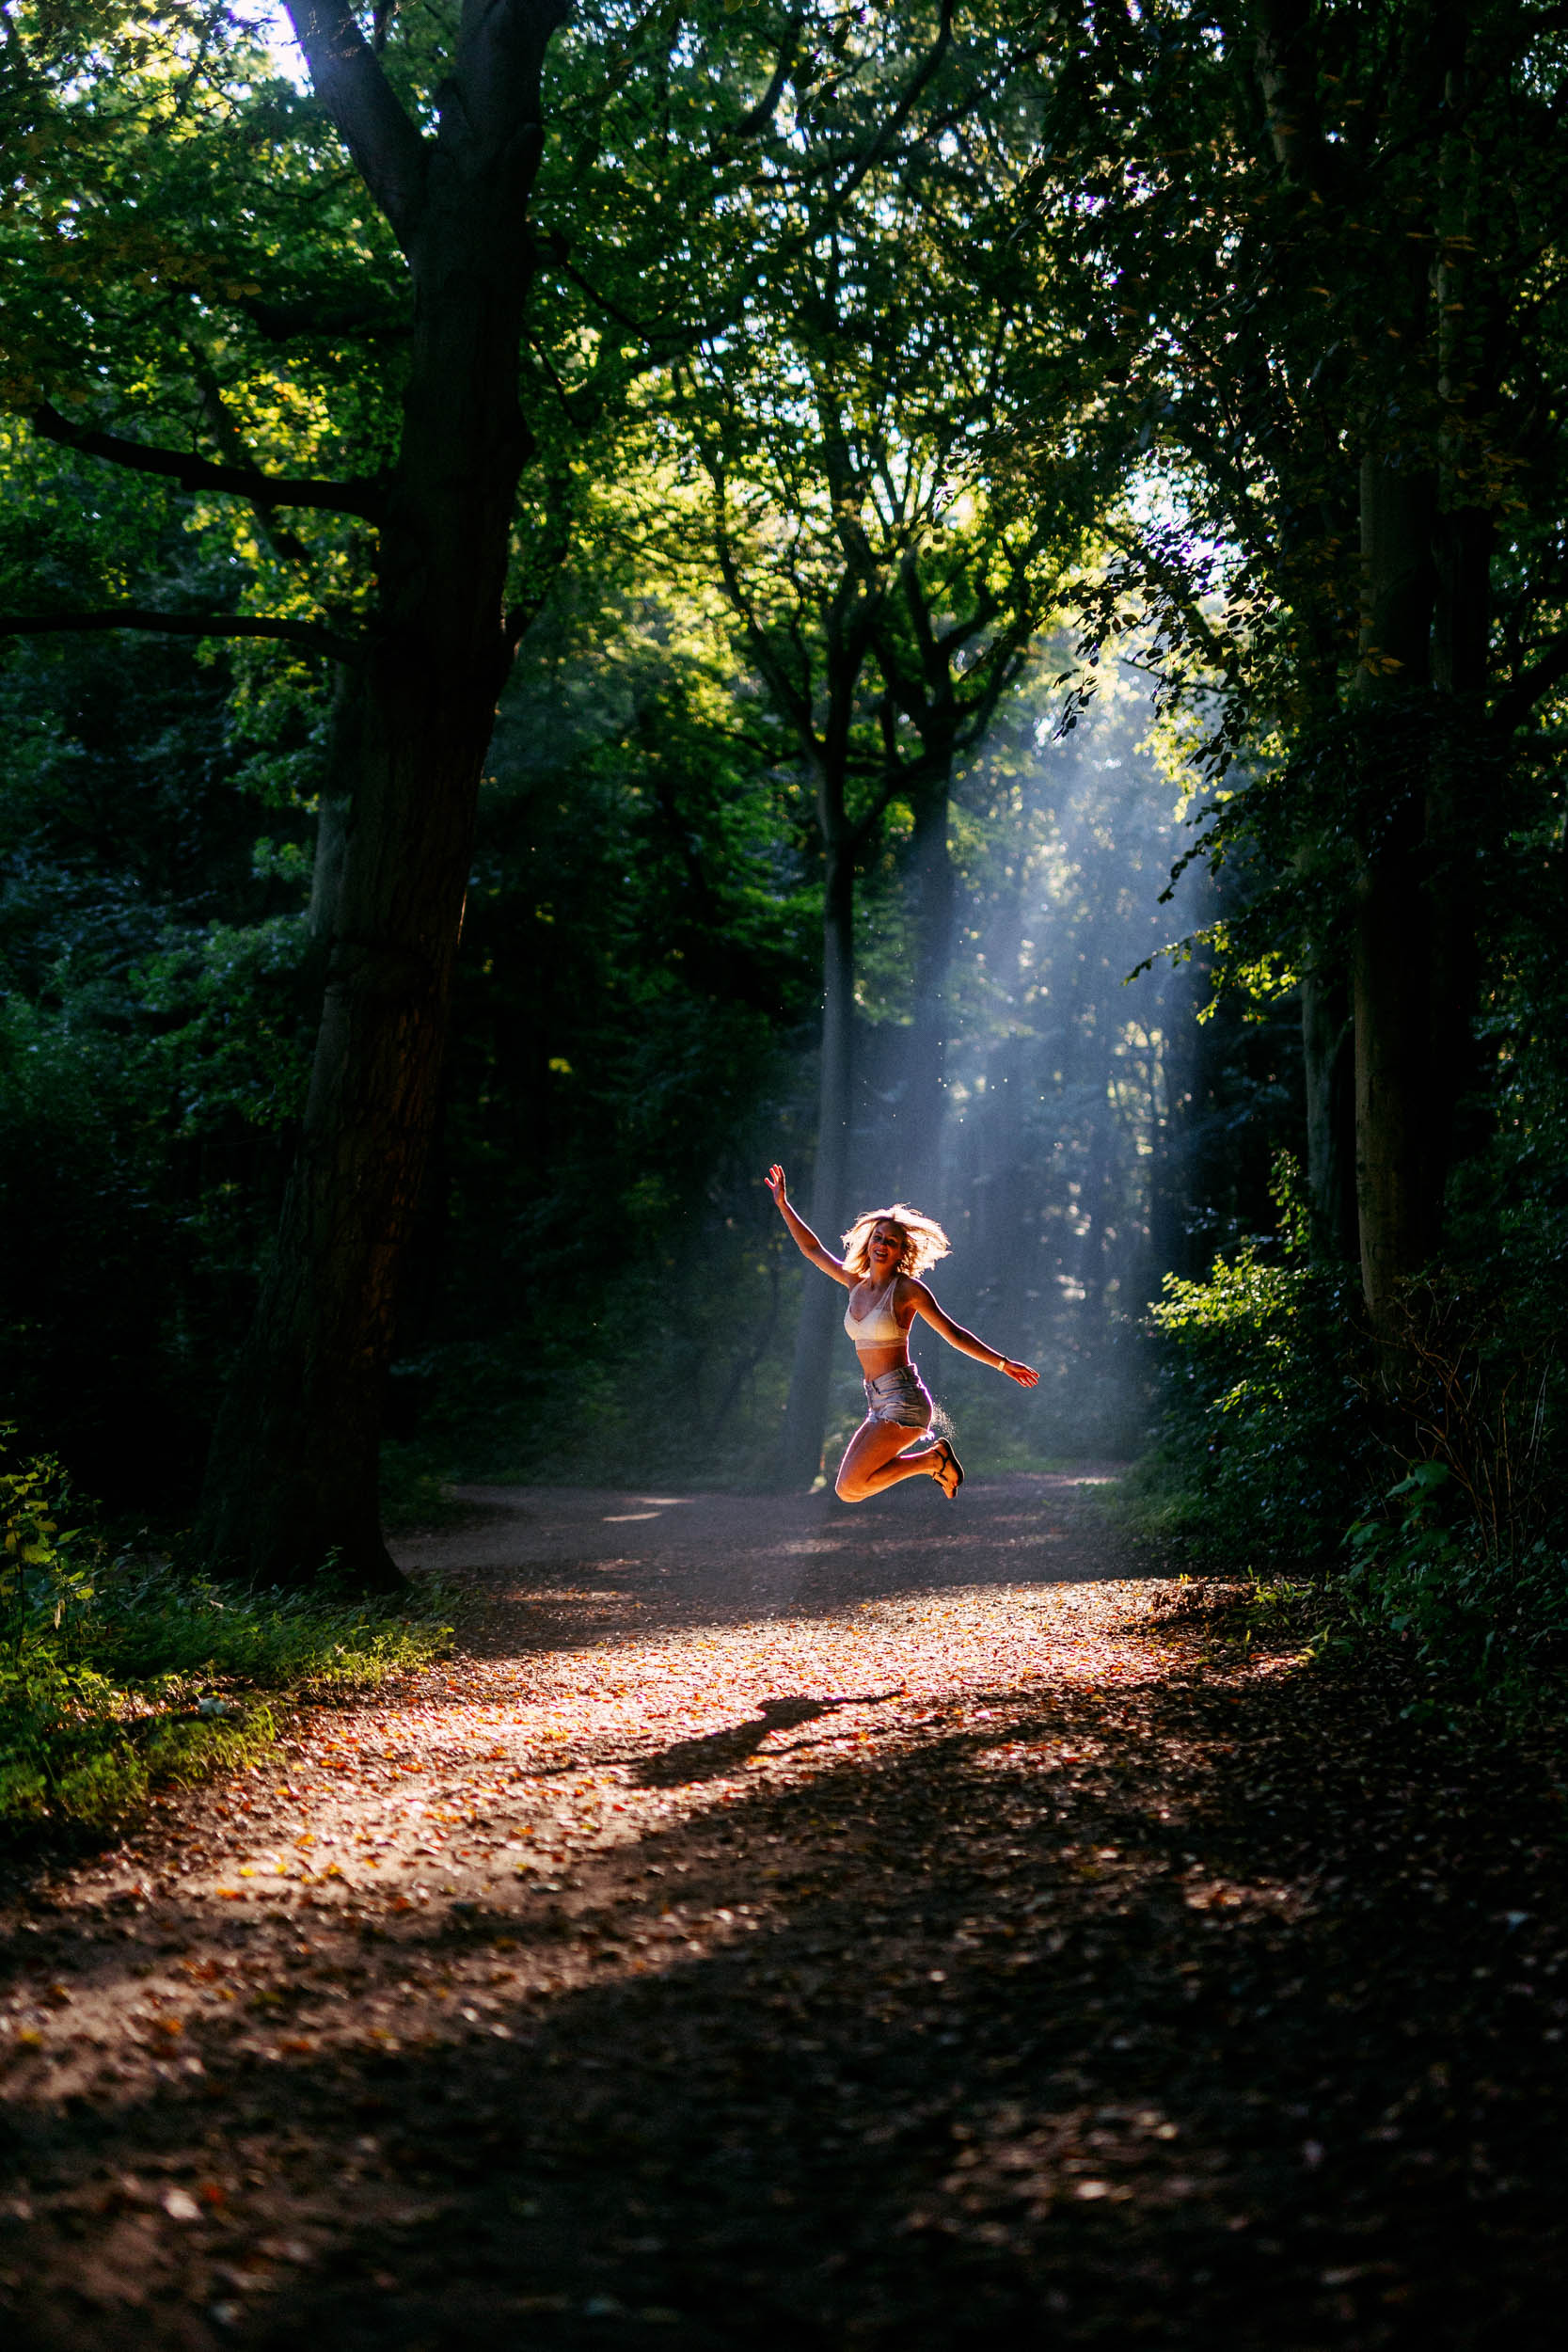 A girl leaps through the air between a strand of trees as sunlight peeks through the foliage.